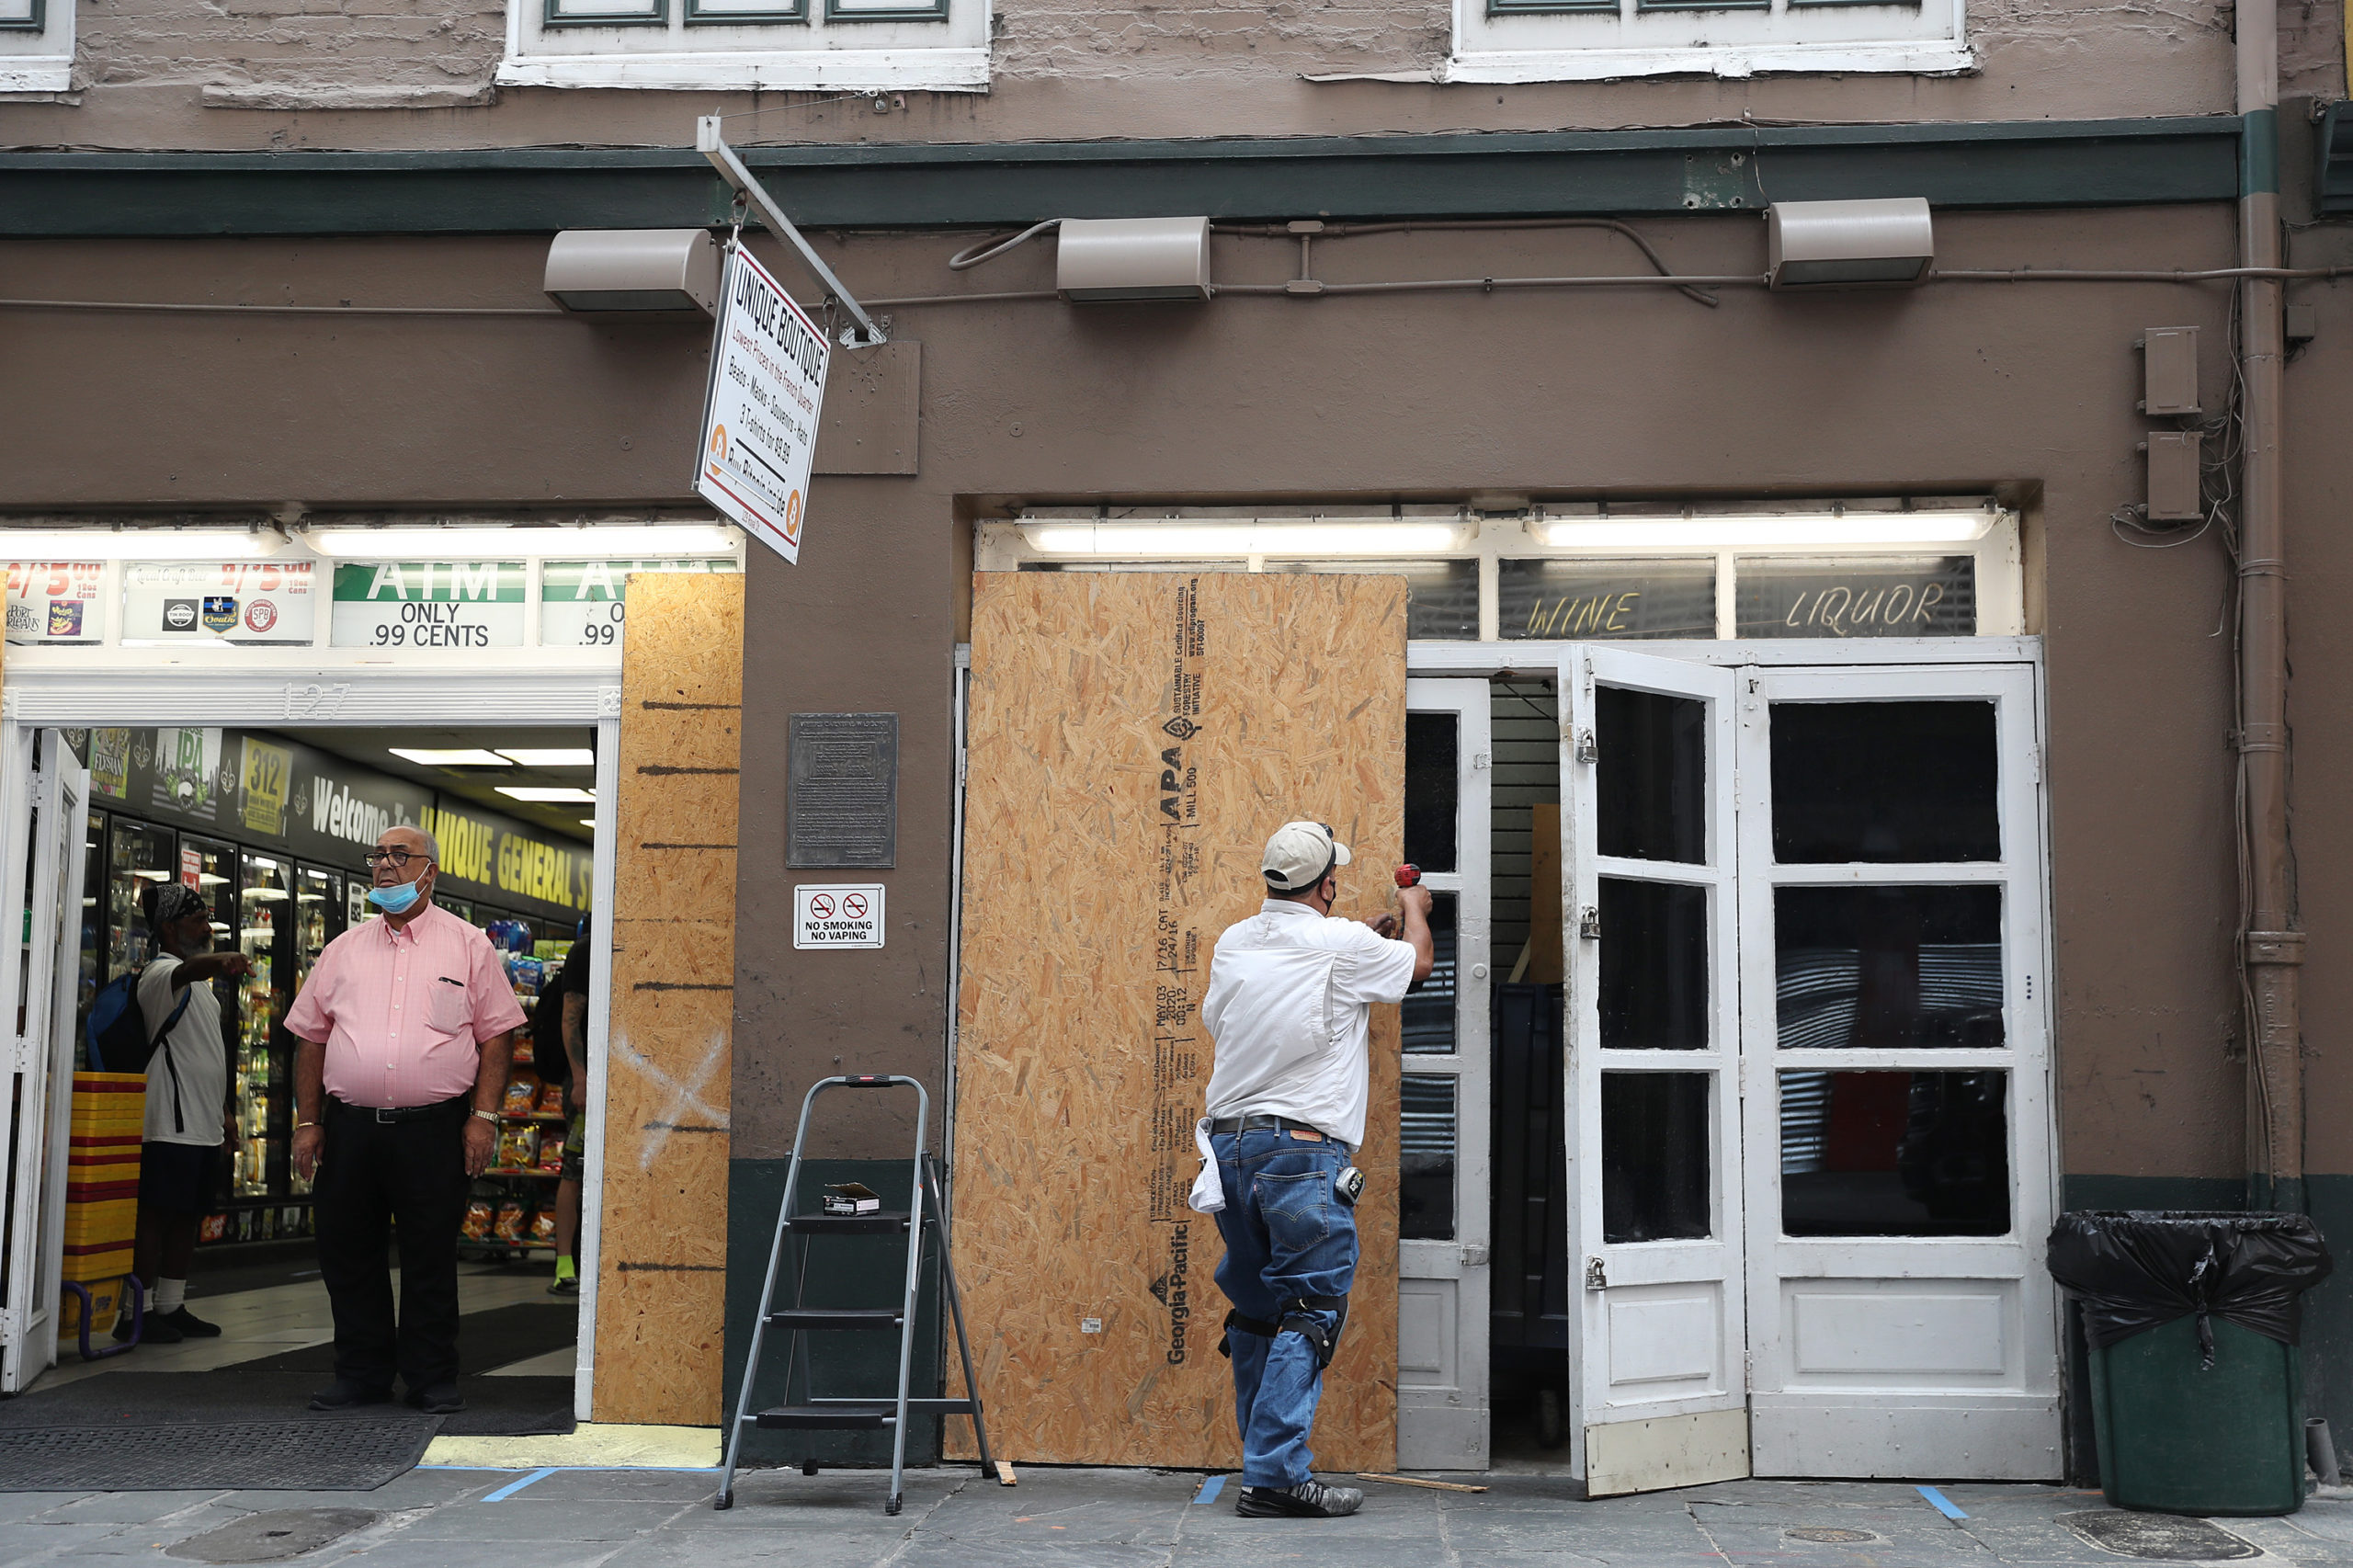 Luis A. Sanabria puts plywood over the windows of a business in the historic French Quarter before the possible arrival of Hurricane Sally on September 14, 2020 in New Orleans, Louisiana. The storm is threatening to bring heavy rain, high winds and a dangerous storm surge from Louisiana to Florida. (Photo by Joe Raedle/Getty Images)